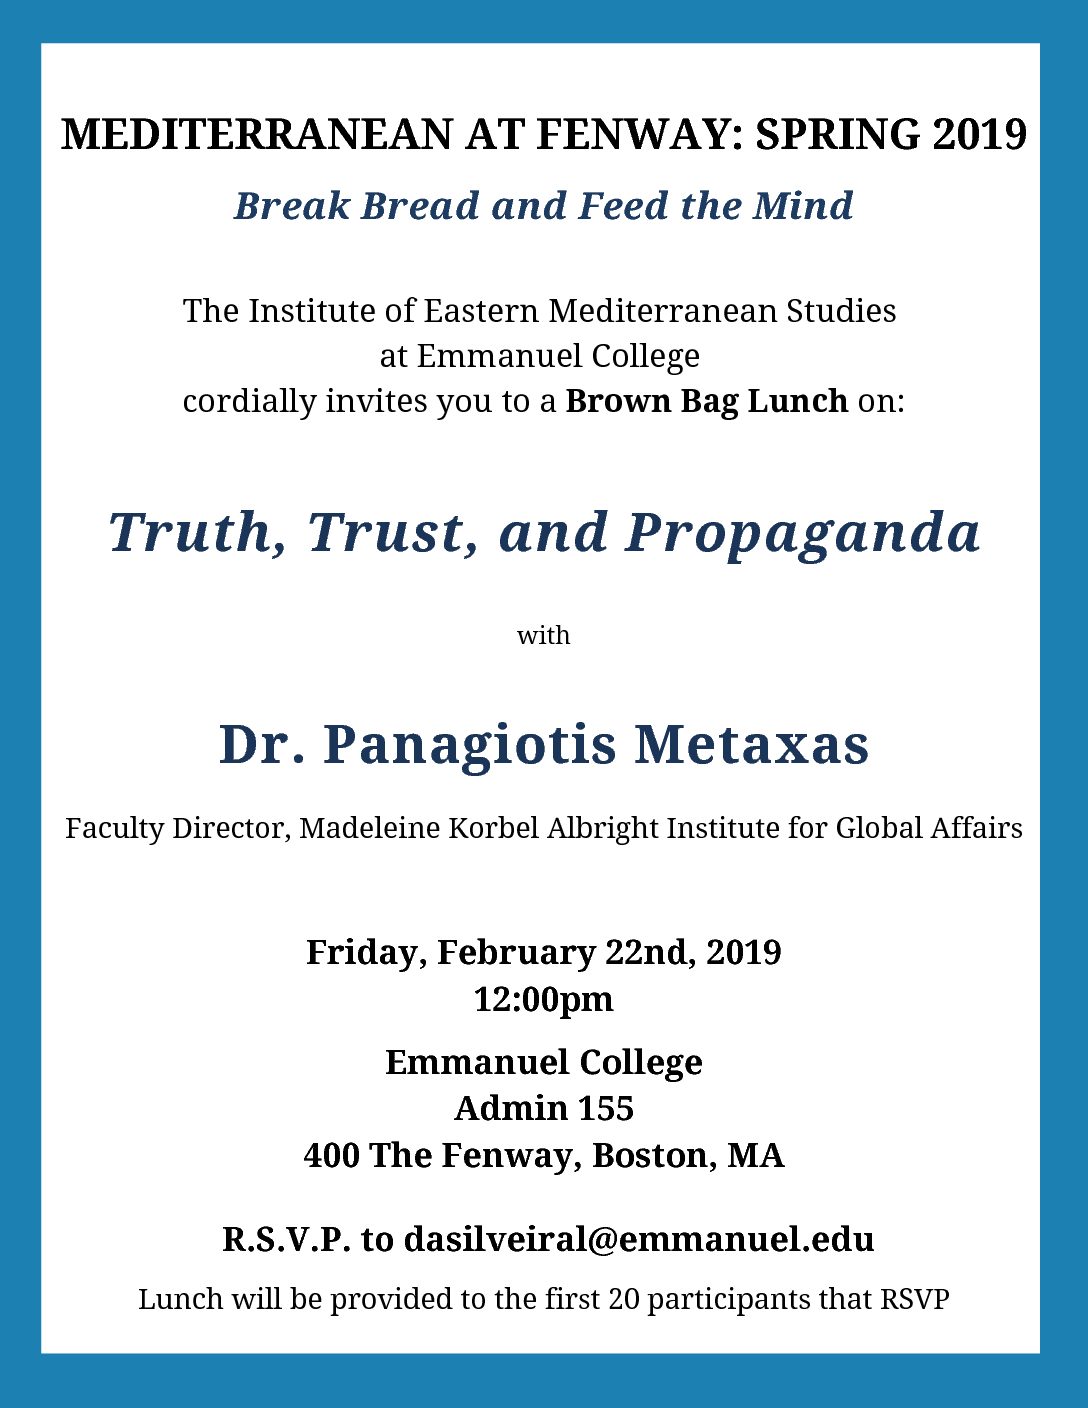 Brown Bag Lunch: Truth, Trust and Propaganda with Dr. Panagiotis Metaxas